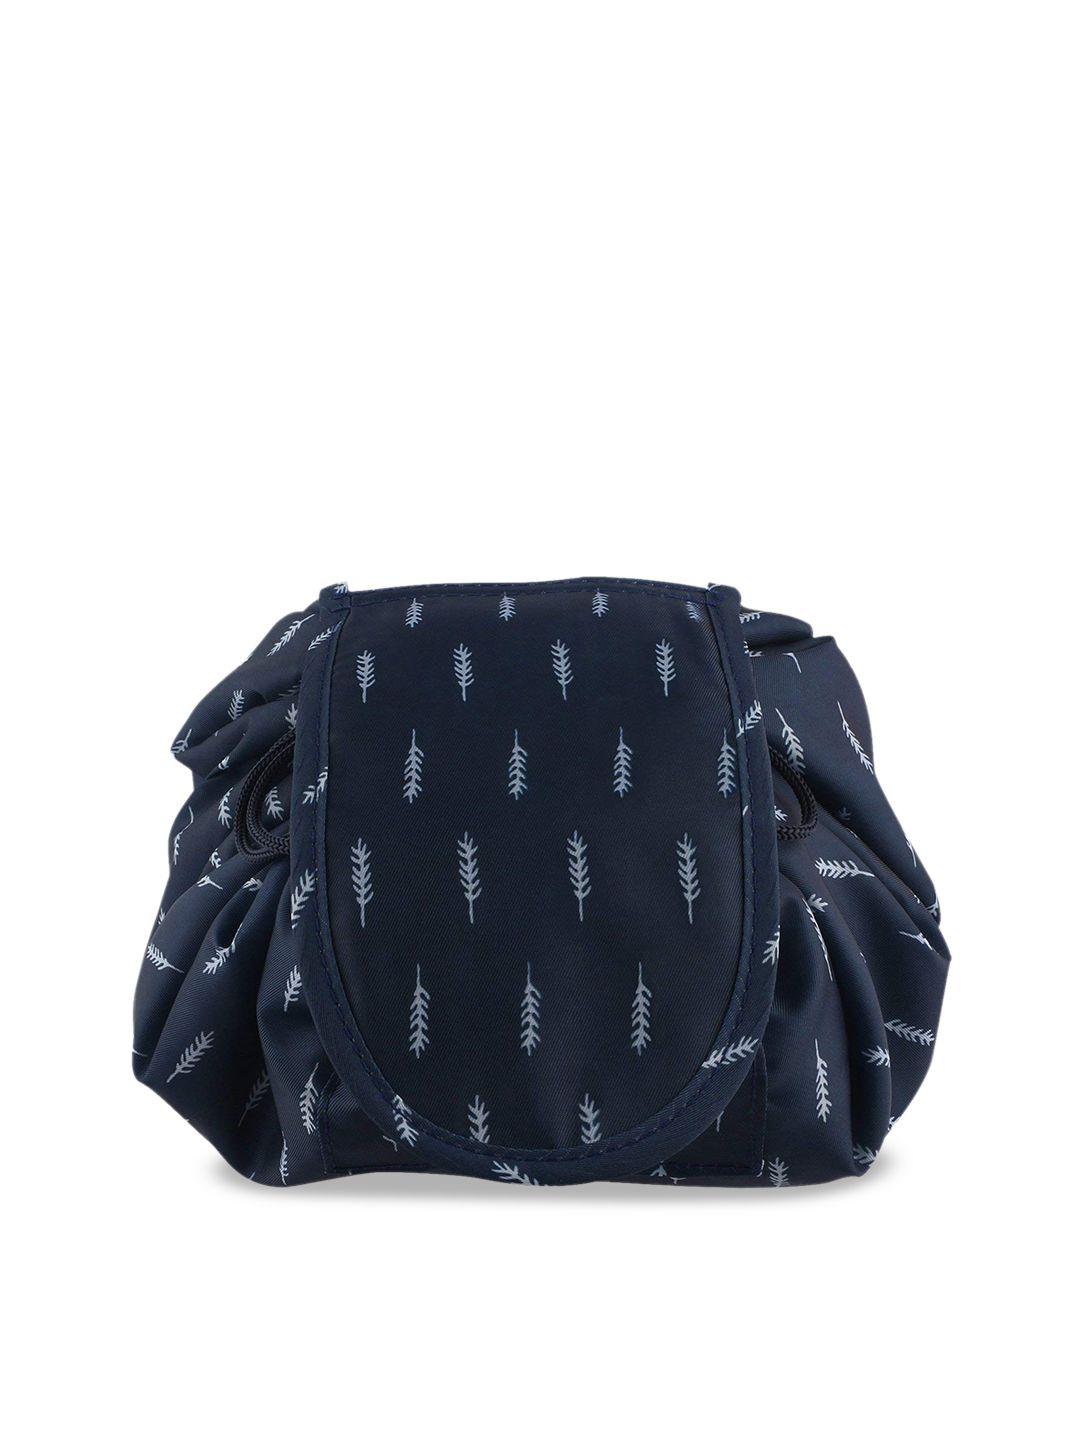 house of quirk blue cosmetic travel pouch